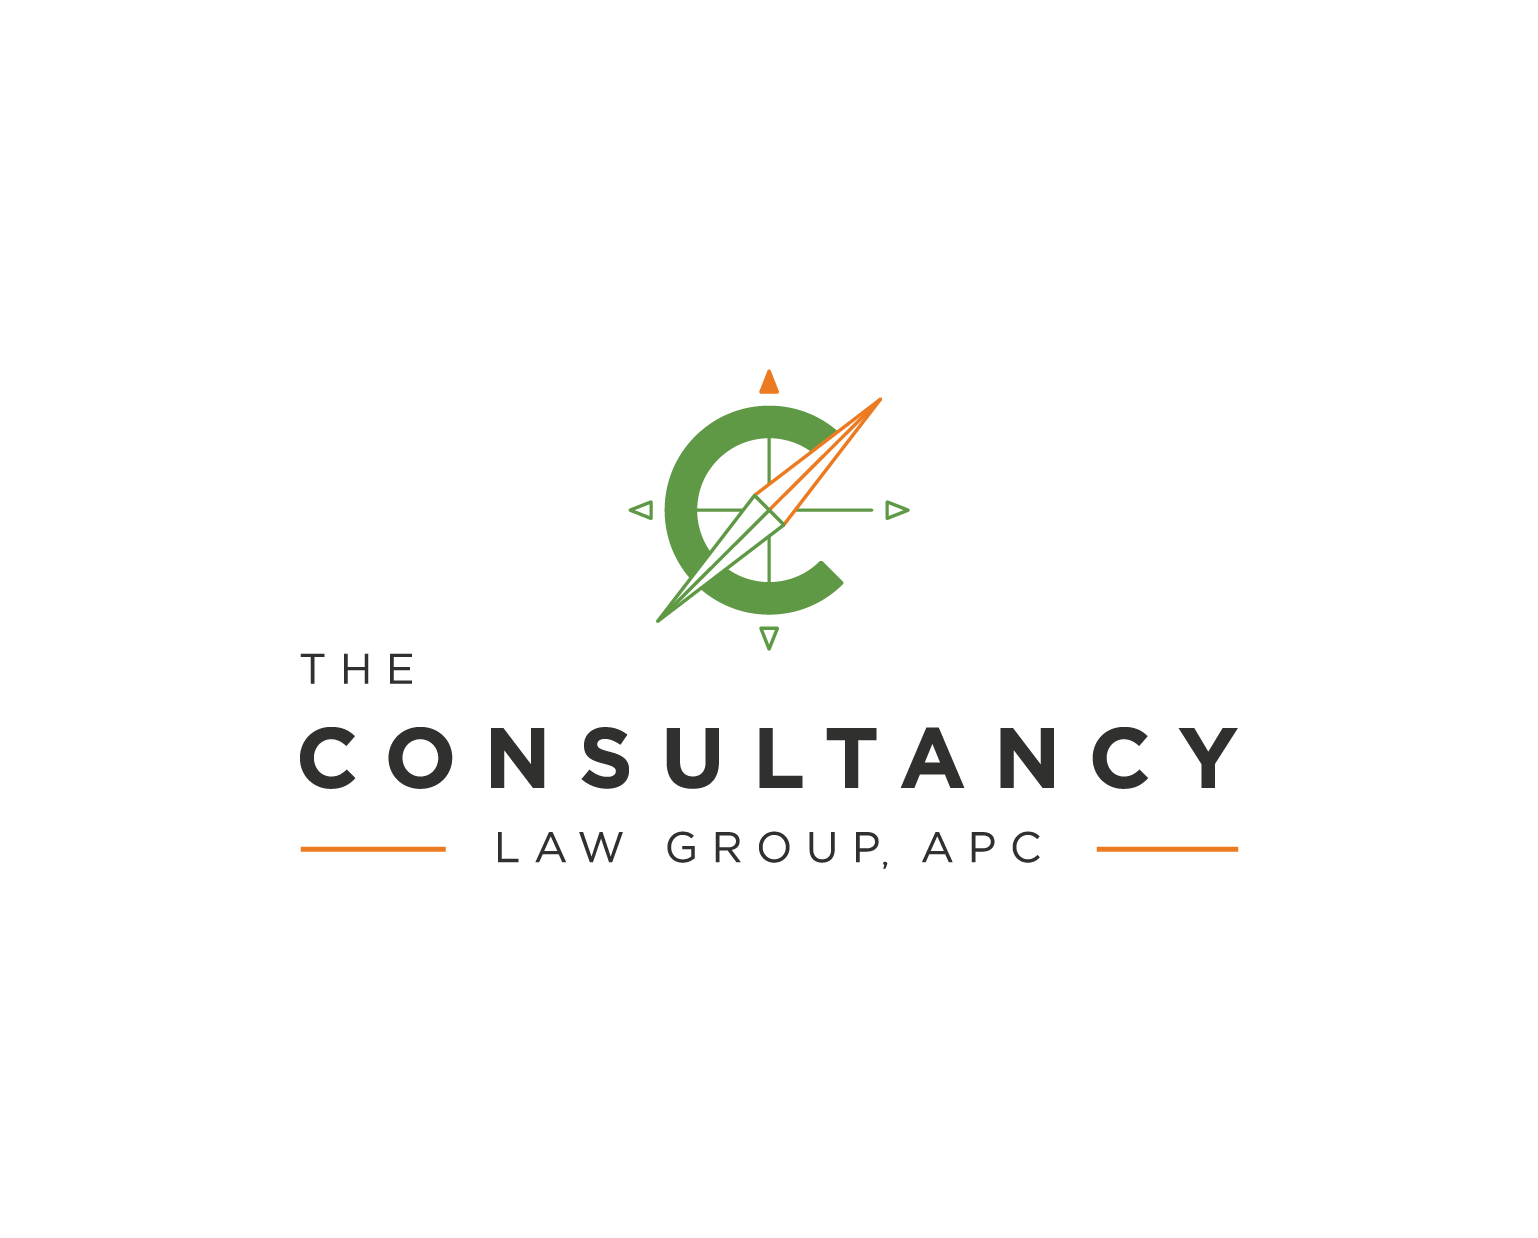 Consultancy Law Group - Logo design and brand strategy.